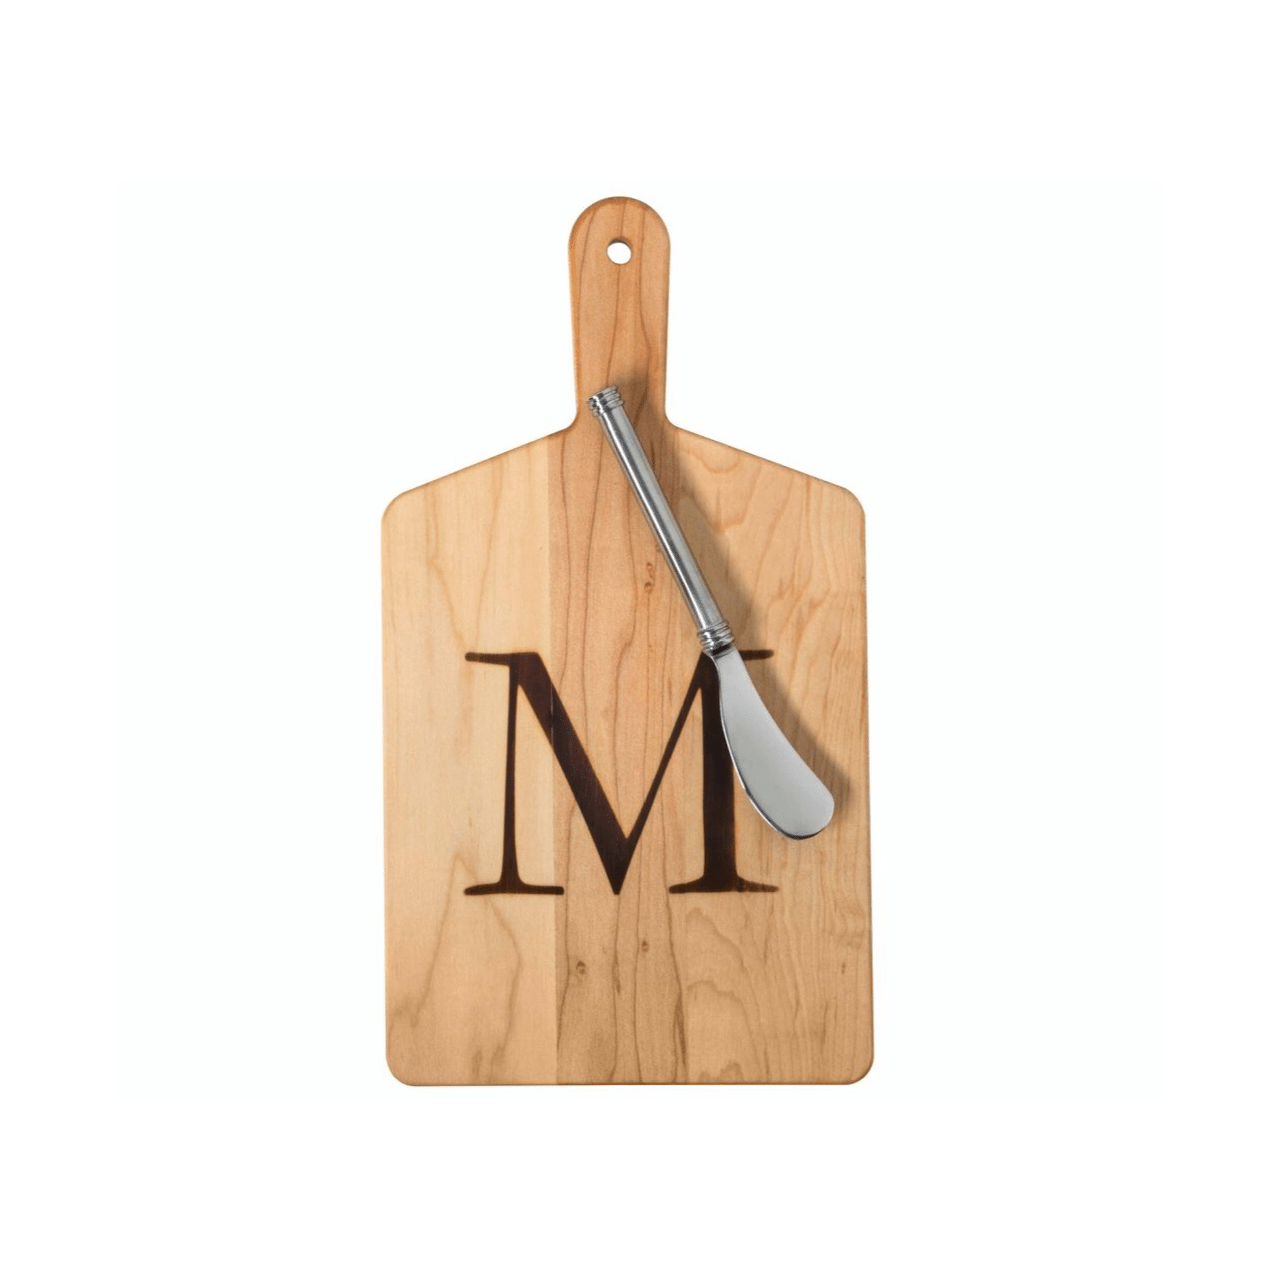 Maple Cheese Board with a Stamped K and Metal Spreader